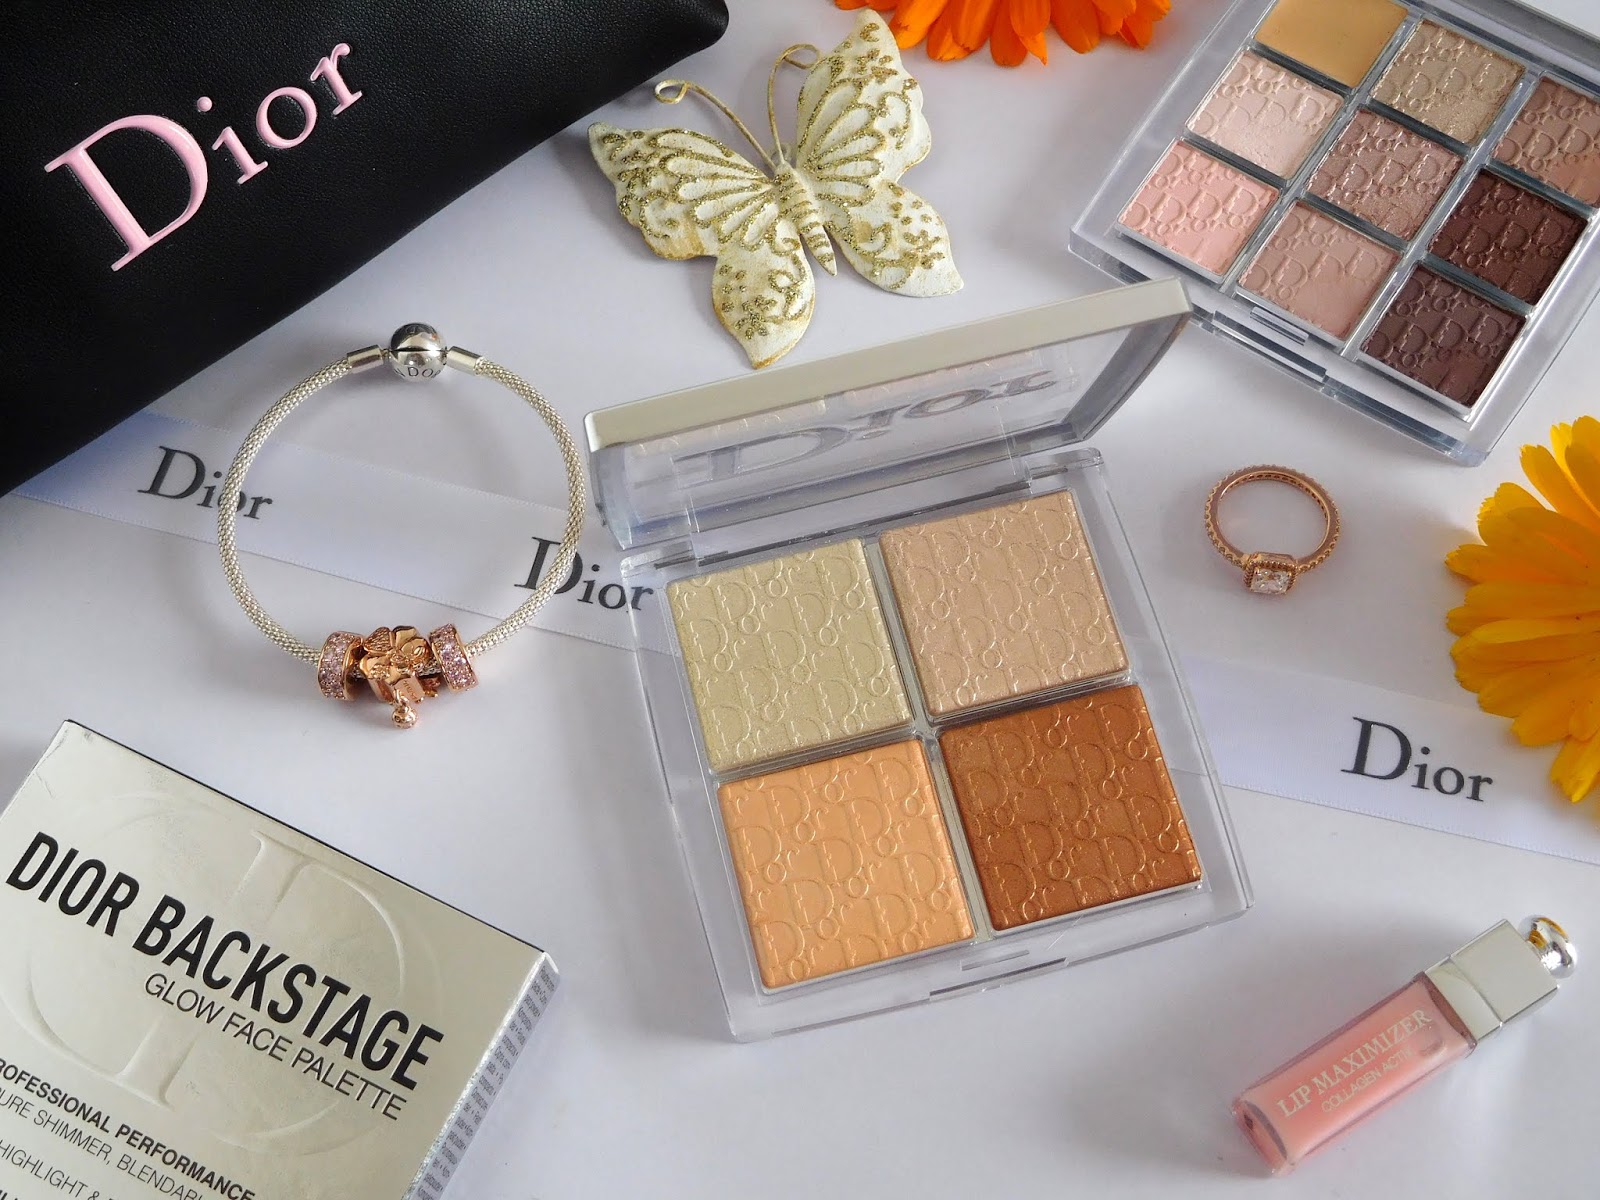 dior glow face palette review